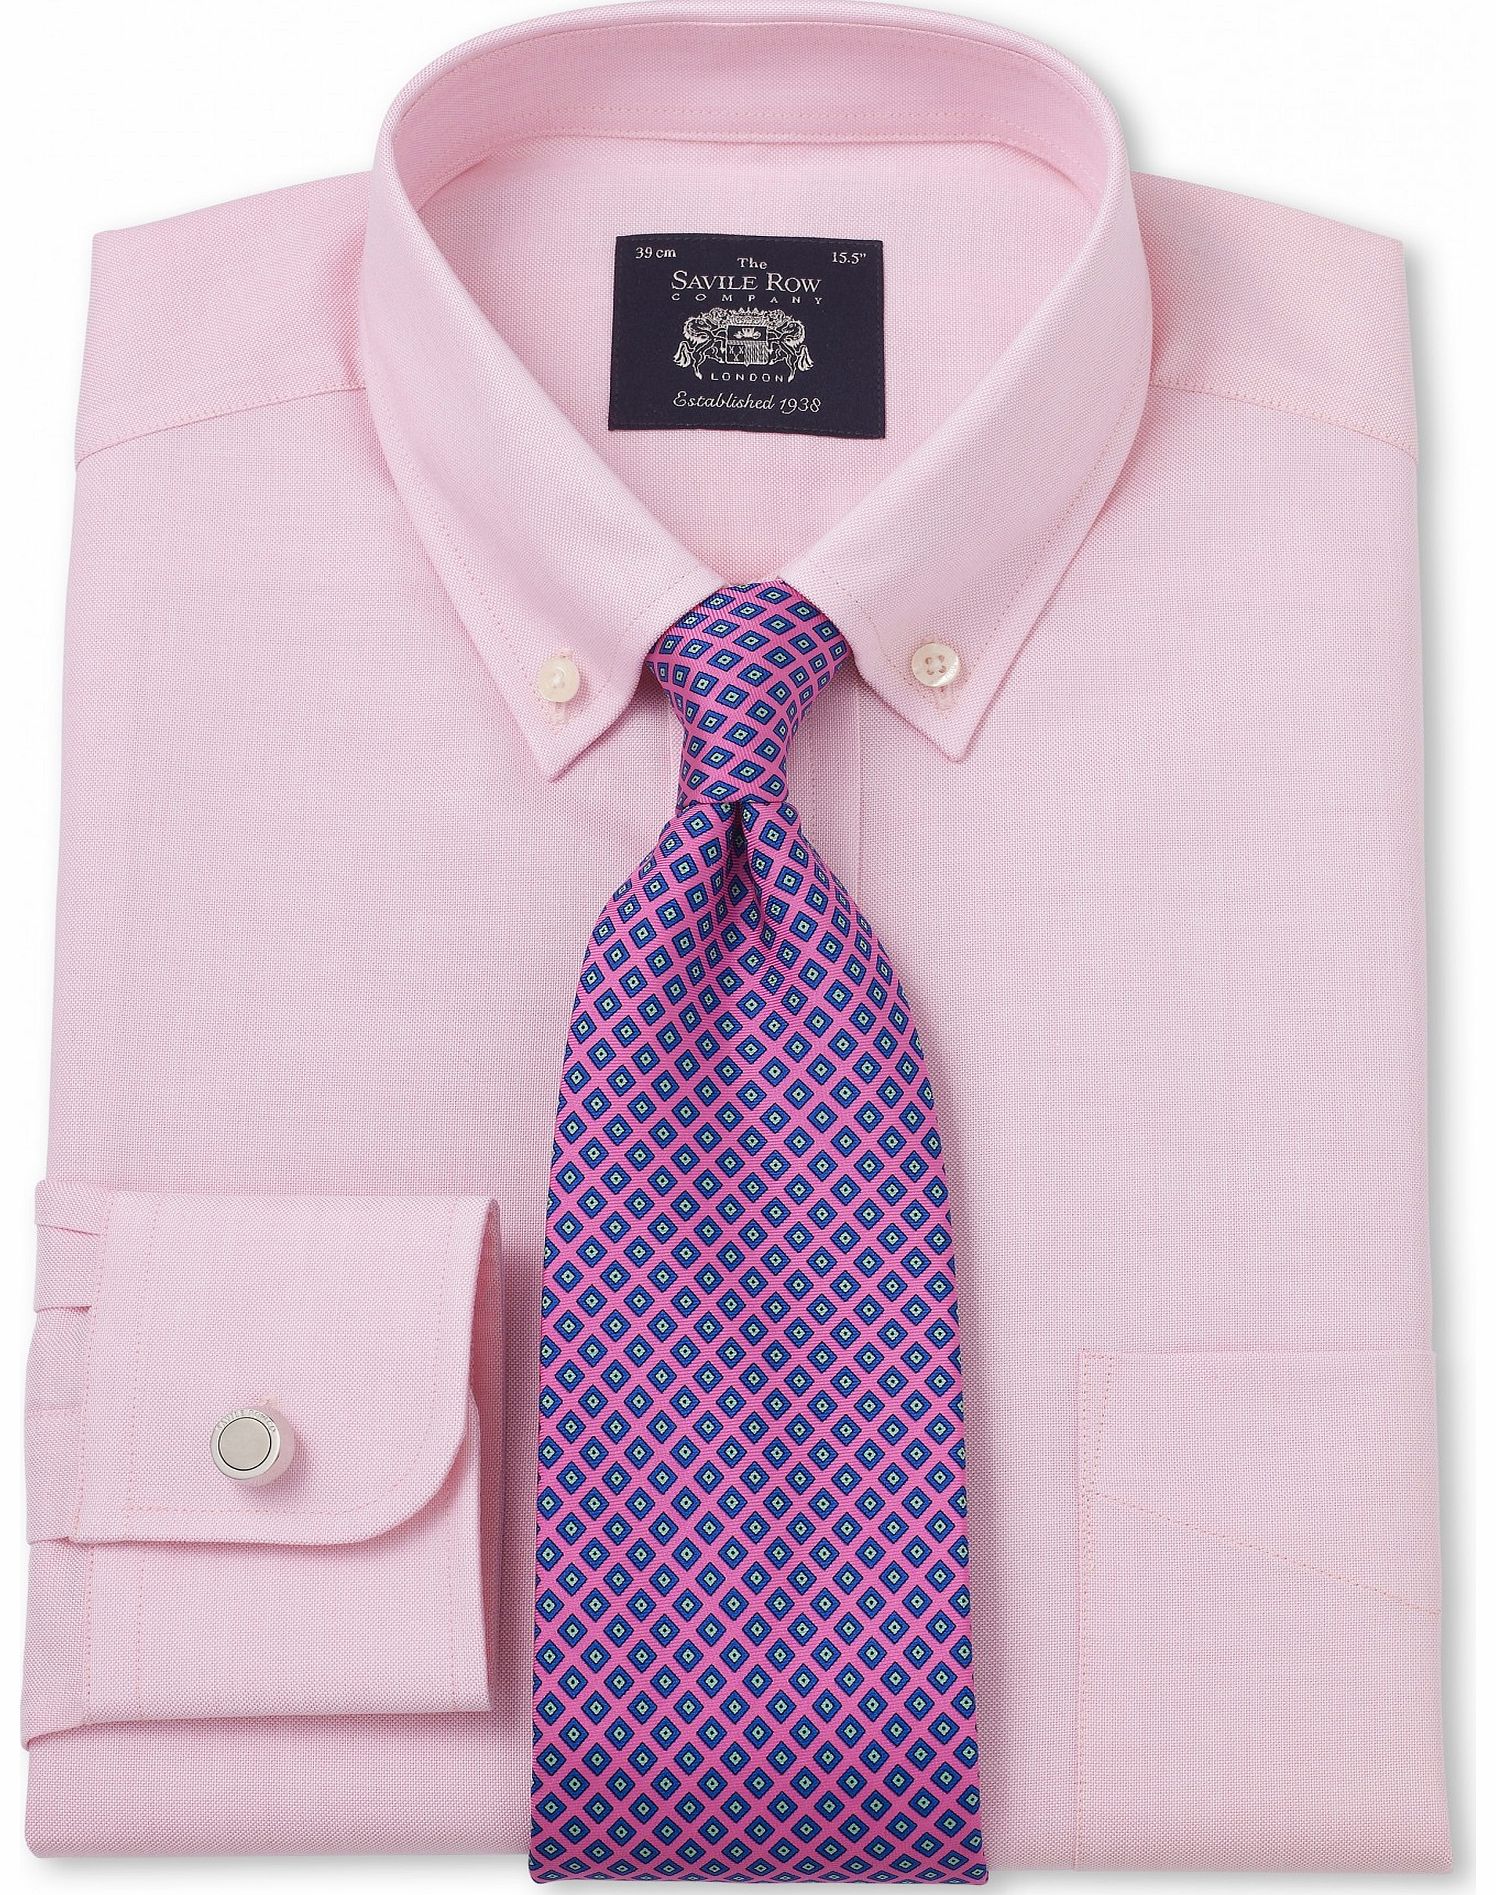 Savile Row Company Pink Pinpoint Classic Fit Shirt 17 1/2``